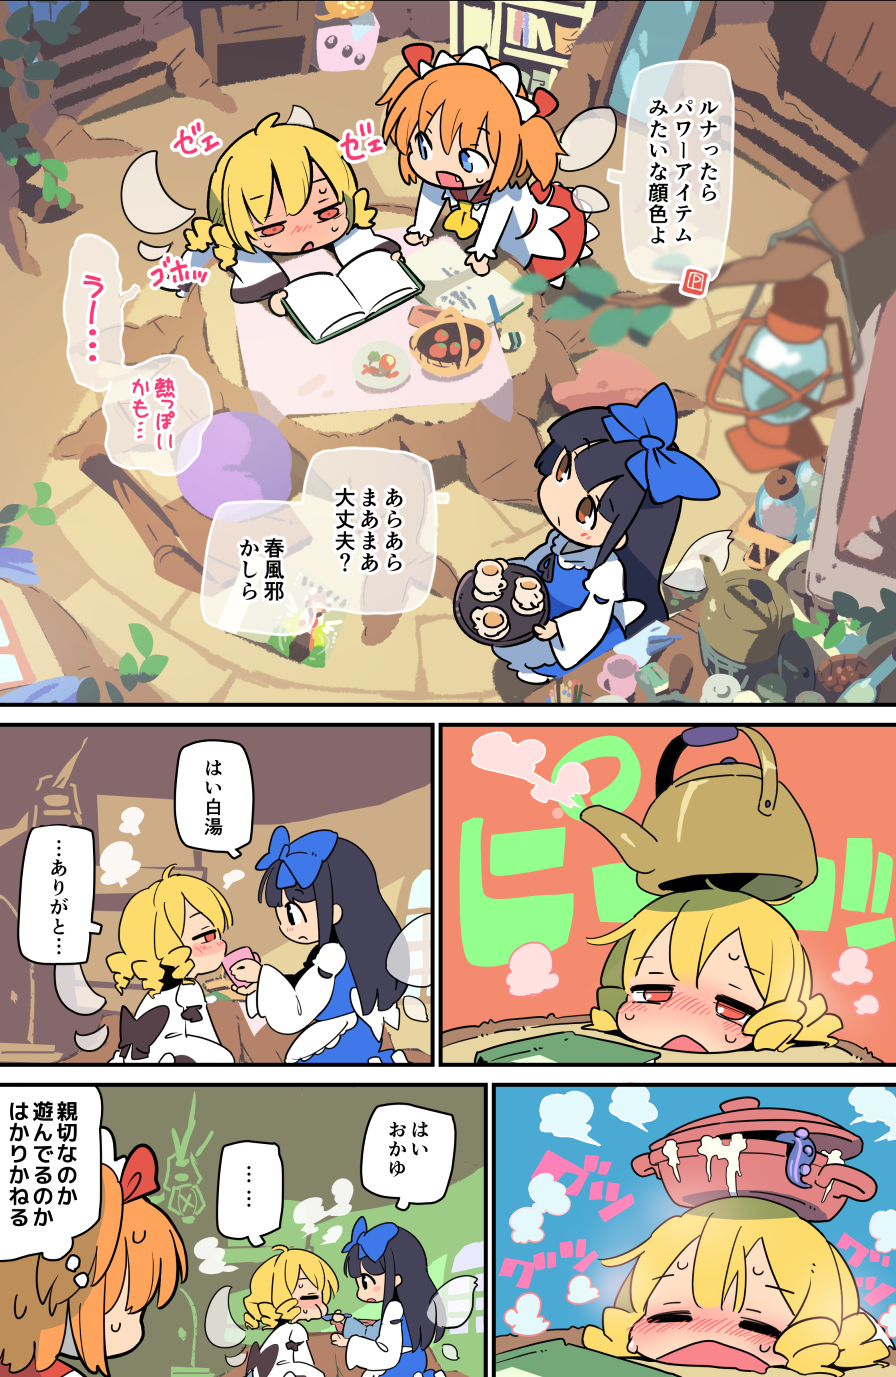 ... 3girls ascot basket black_bow black_hair blonde_hair blouse blue_bow blue_dress blue_eyes blush boiling book bookshelf bow brown_eyes chestnut_mouth comic cup dress eraser fairy_wings from_above hair_bow headdress highres indoors jar kettle lantern long_hair luna_child moyazou_(kitaguni_moyashi_seizoujo) mug multiple_girls no_hat no_headwear orange_hair pencil red_eyes red_skirt ringlets sick skirt spoon star_sapphire steam sunny_milk sweat teacup tentacle touhou translation_request tray two_side_up white_blouse white_dress wide_sleeves wings yellow_neckwear